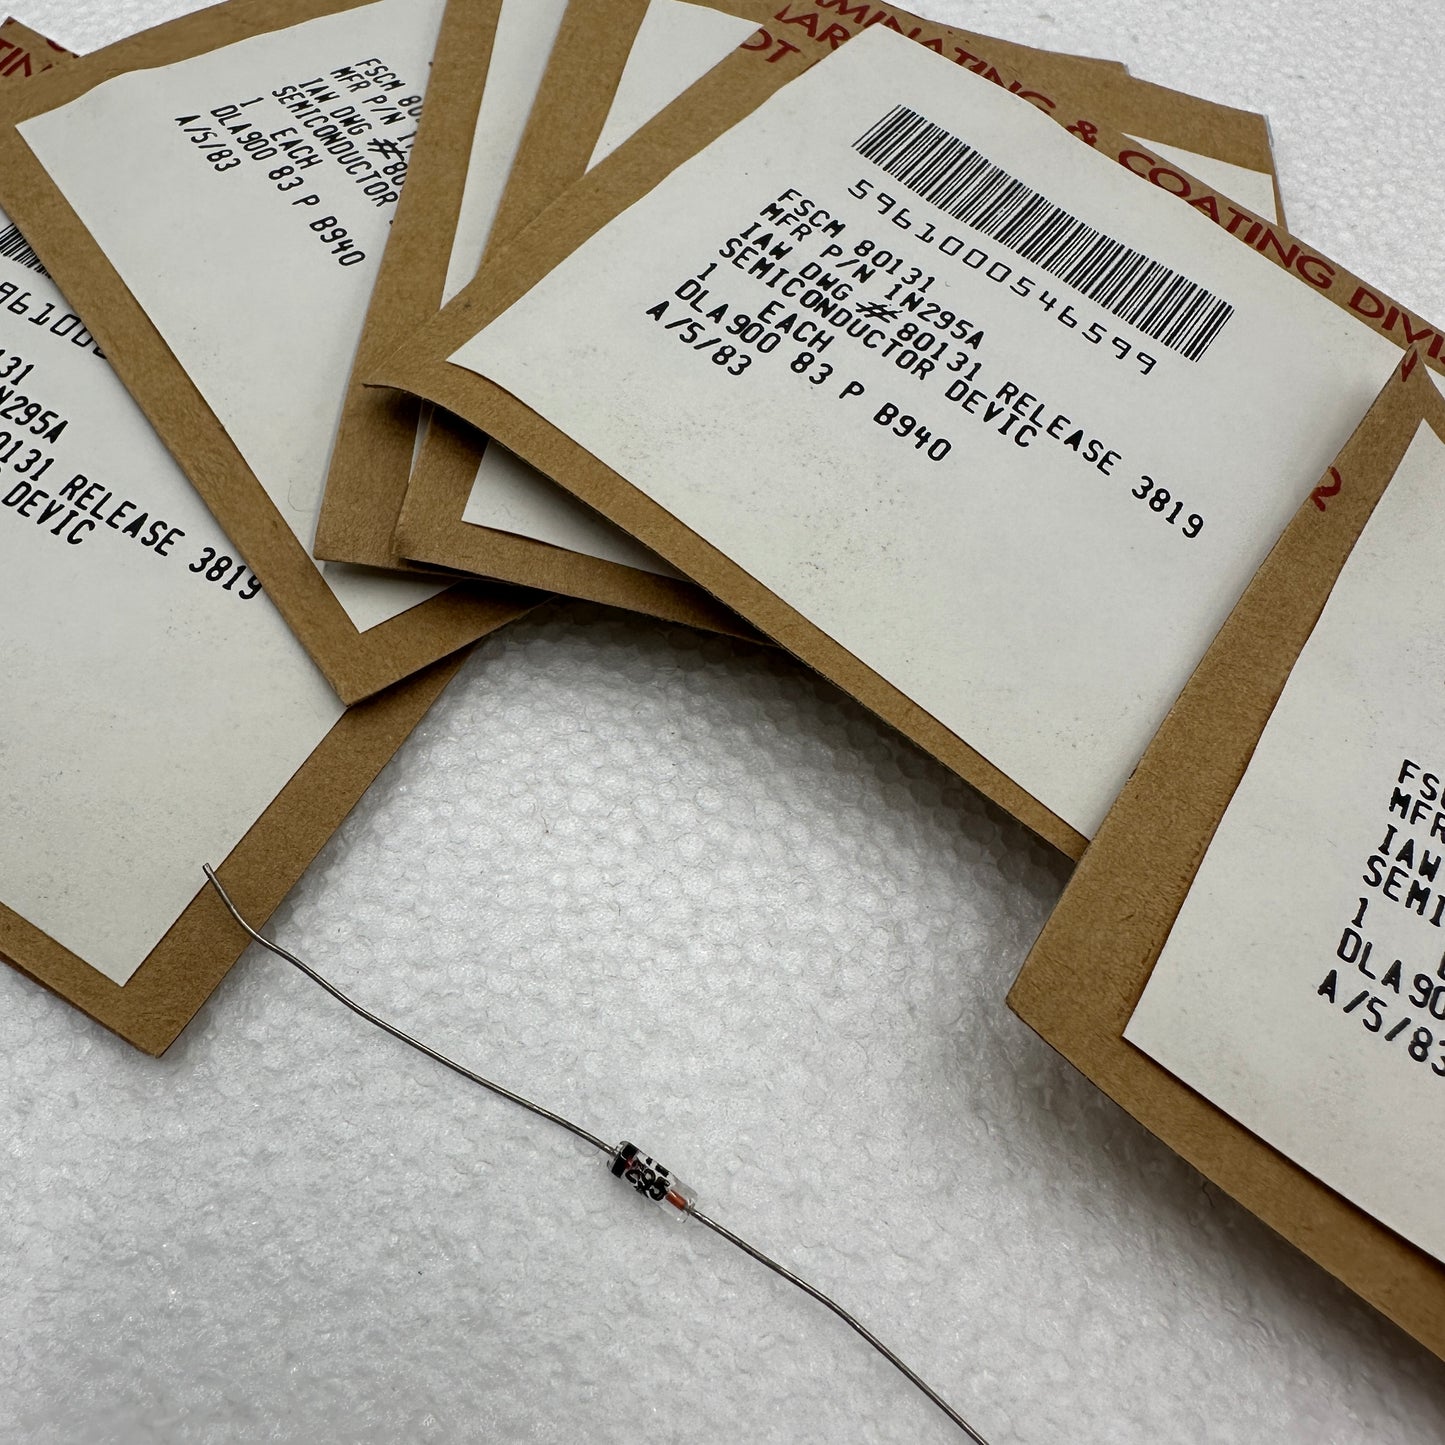 1N295A Military Spec Germanium Diode Individually Sealed 40v 200mA